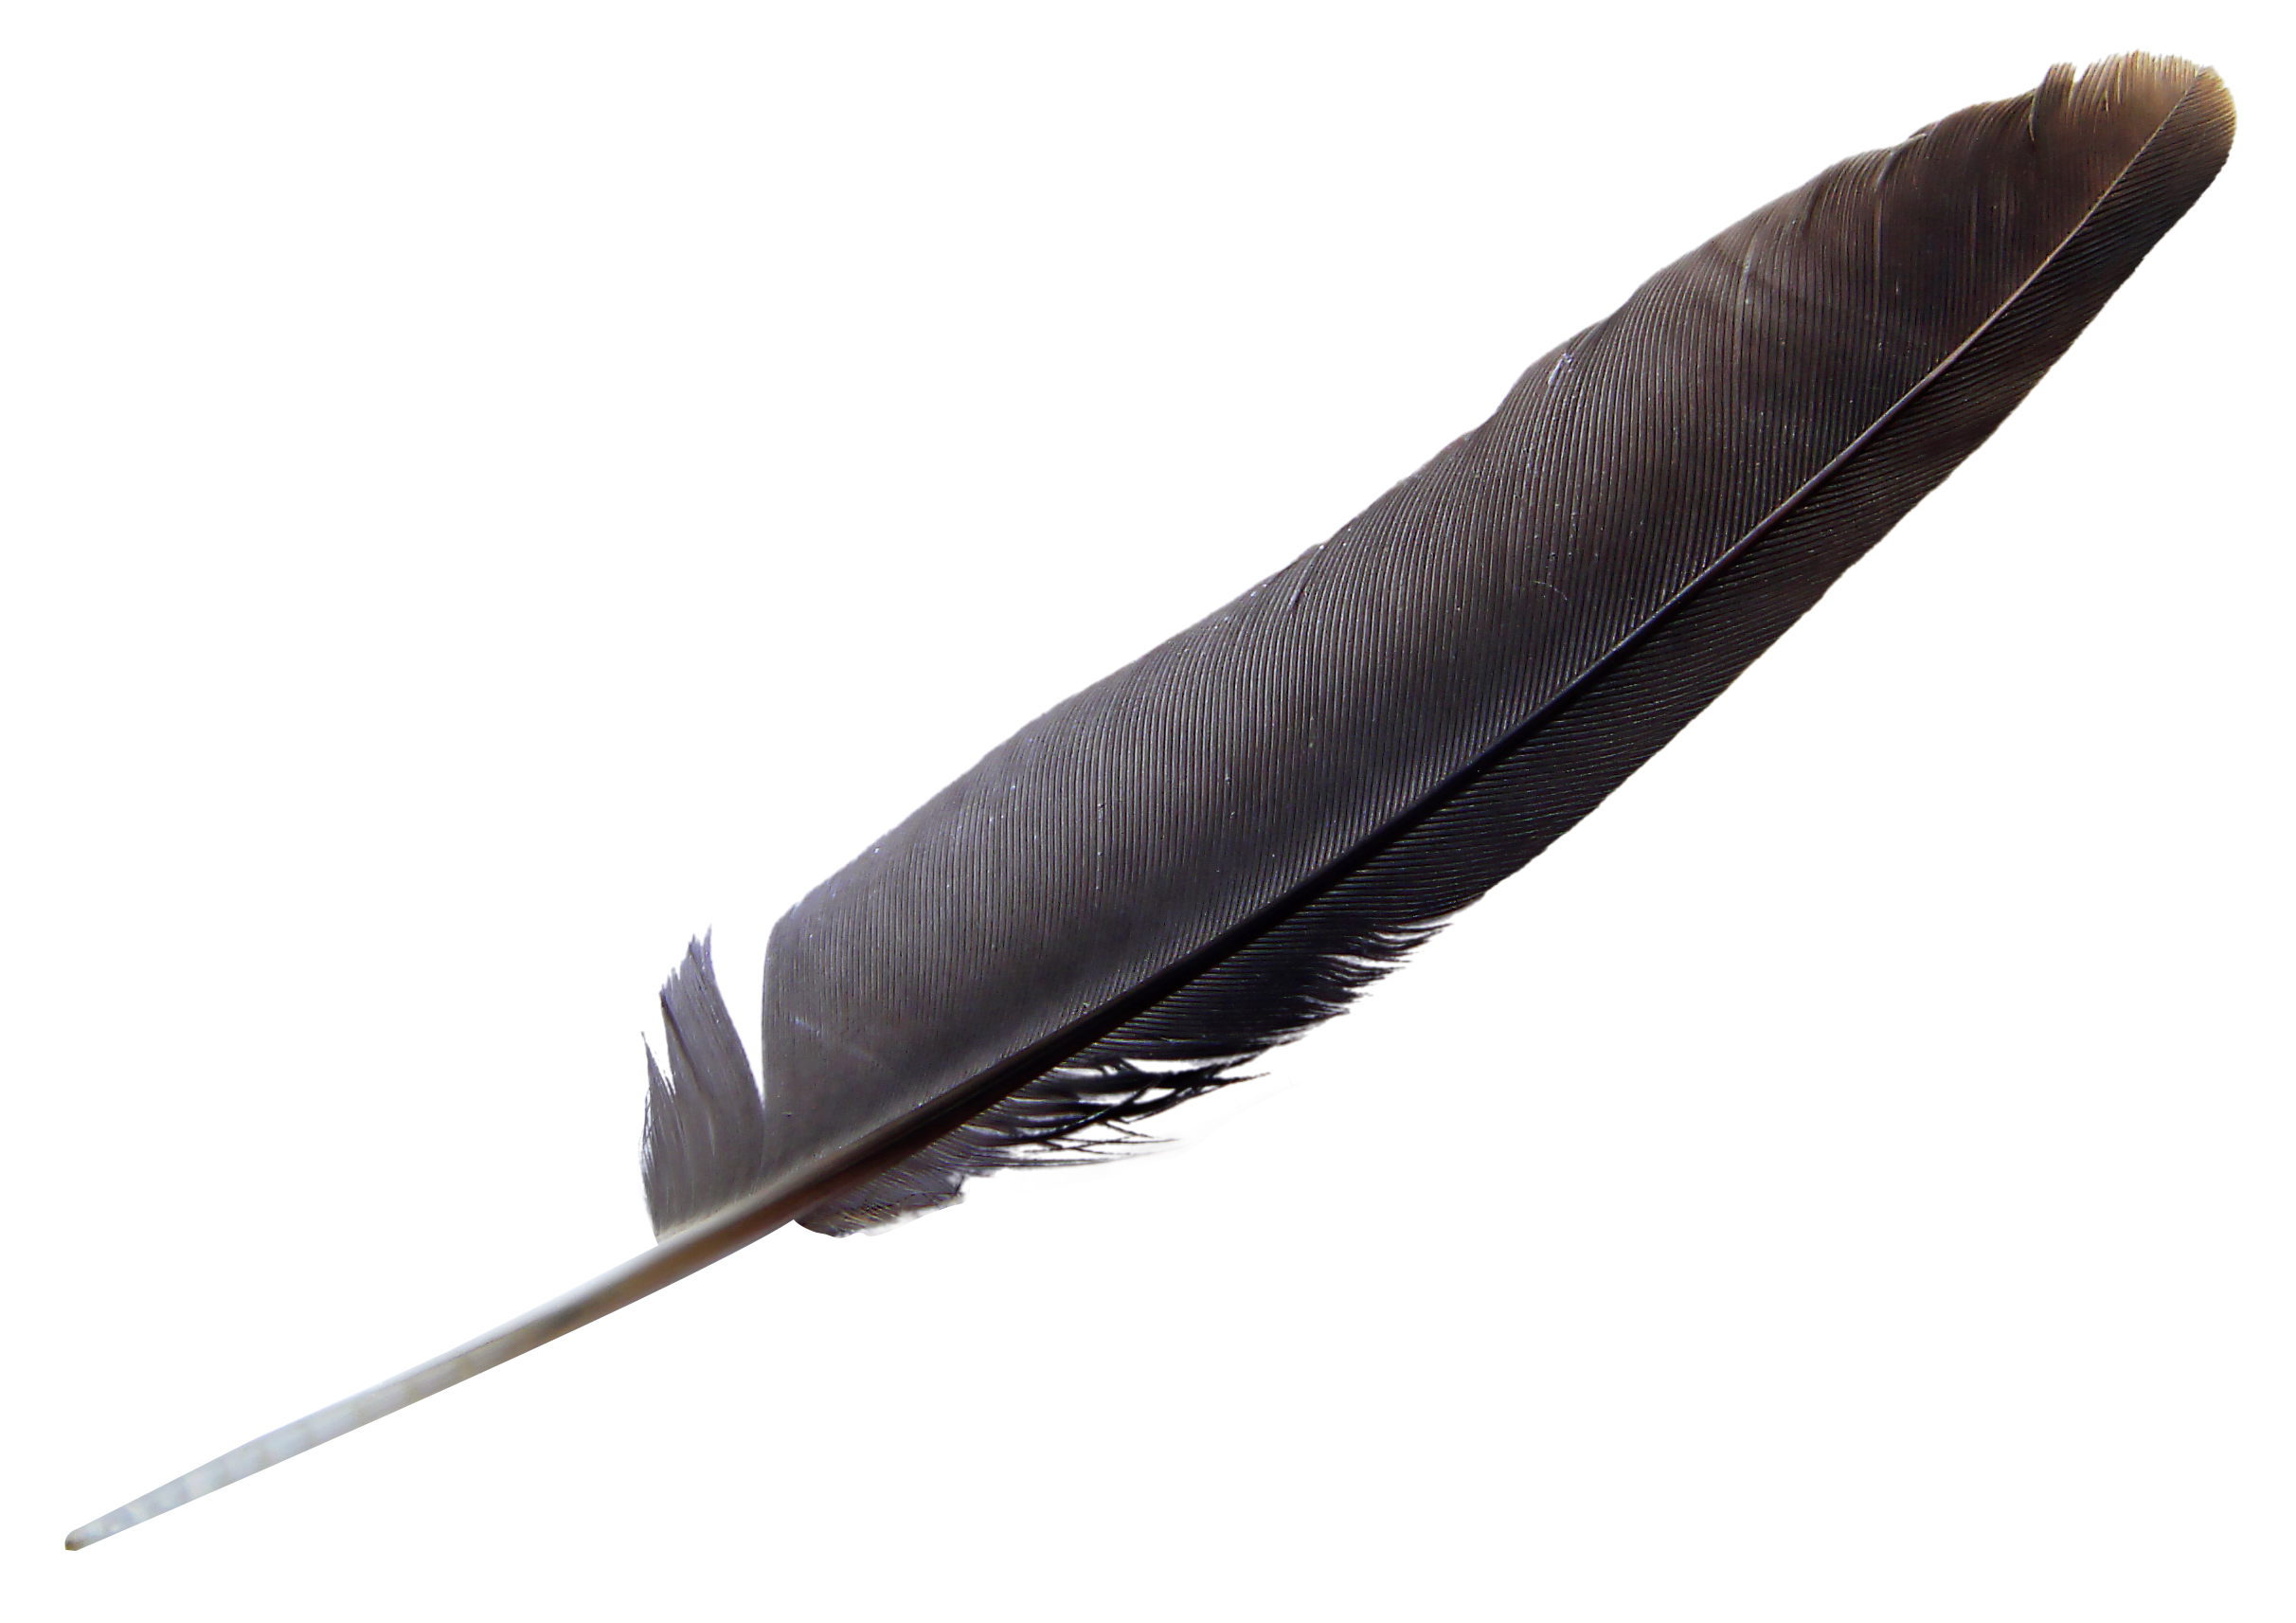 Feather png image purepng. Feathers clipart transparent background